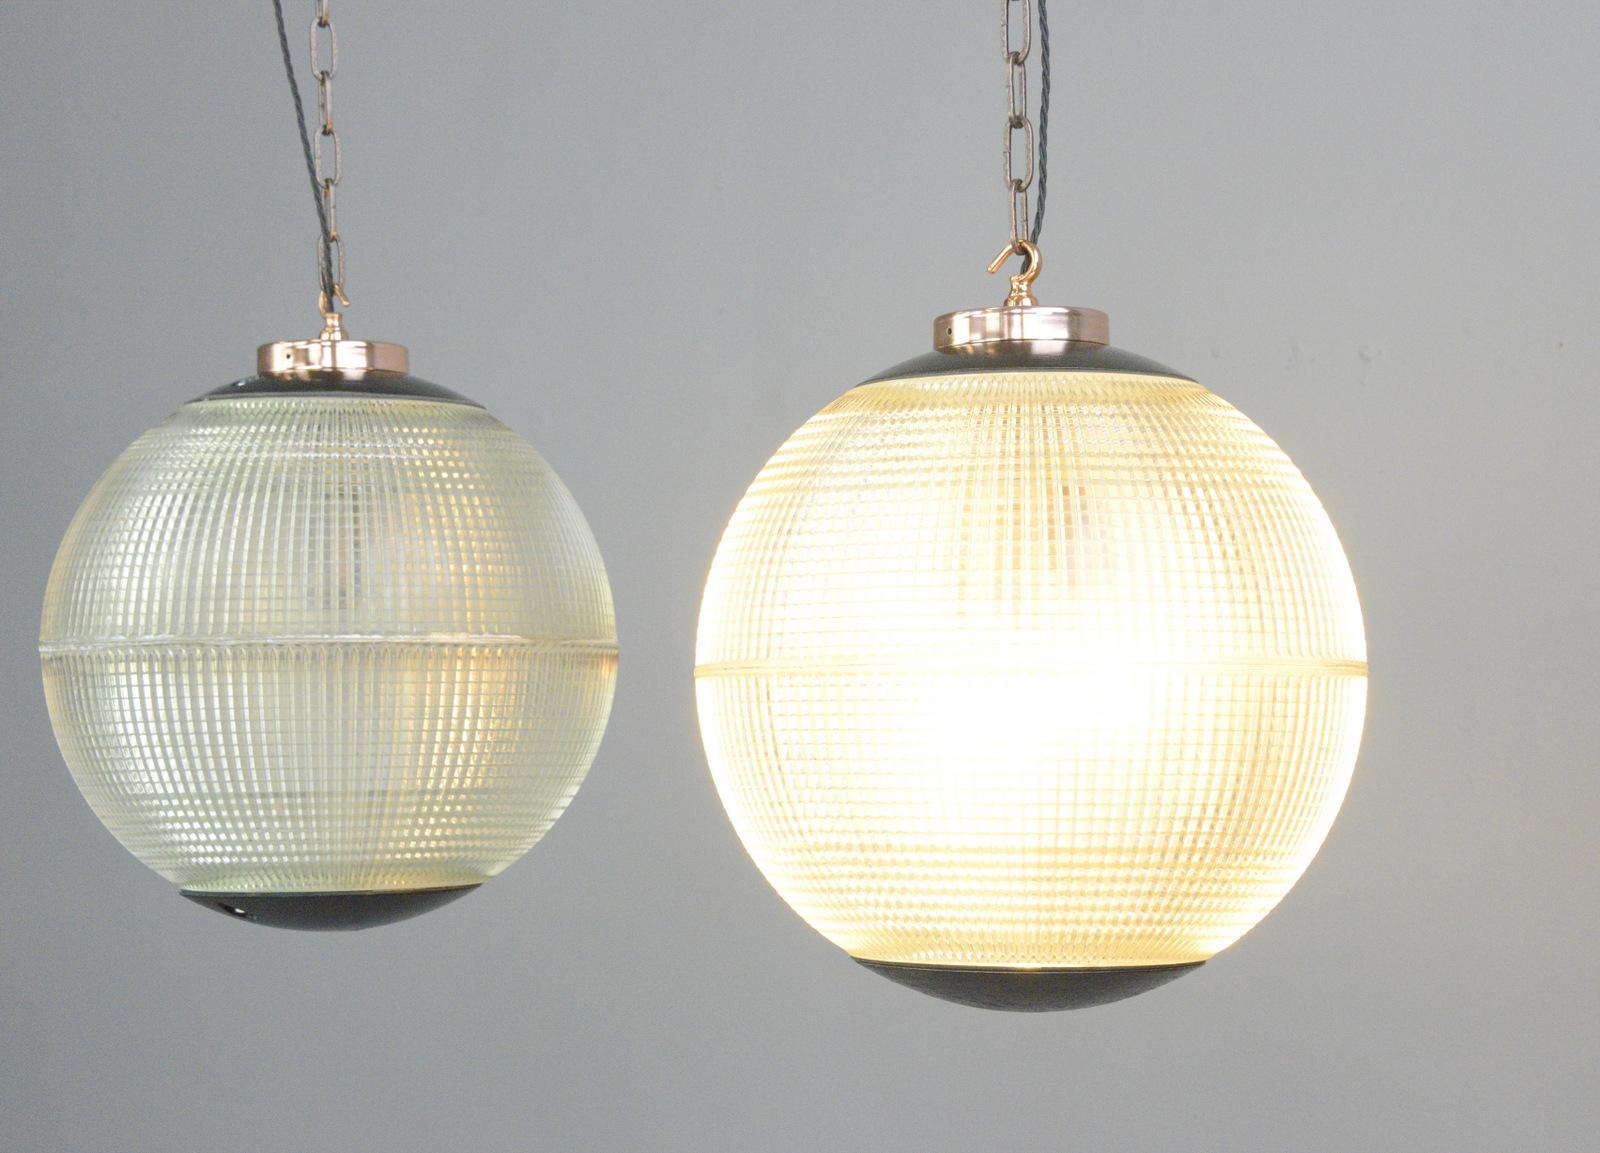 Parisian Holophane globe lights, circa 1950s

- Price is per light
- Heavy prismatic glass
- Comes with chain and ceiling hook
- Takes E27 fitting bulbs
- Polished copper top and hook
- Originally used on the tops of street lamps across Paris
- Made